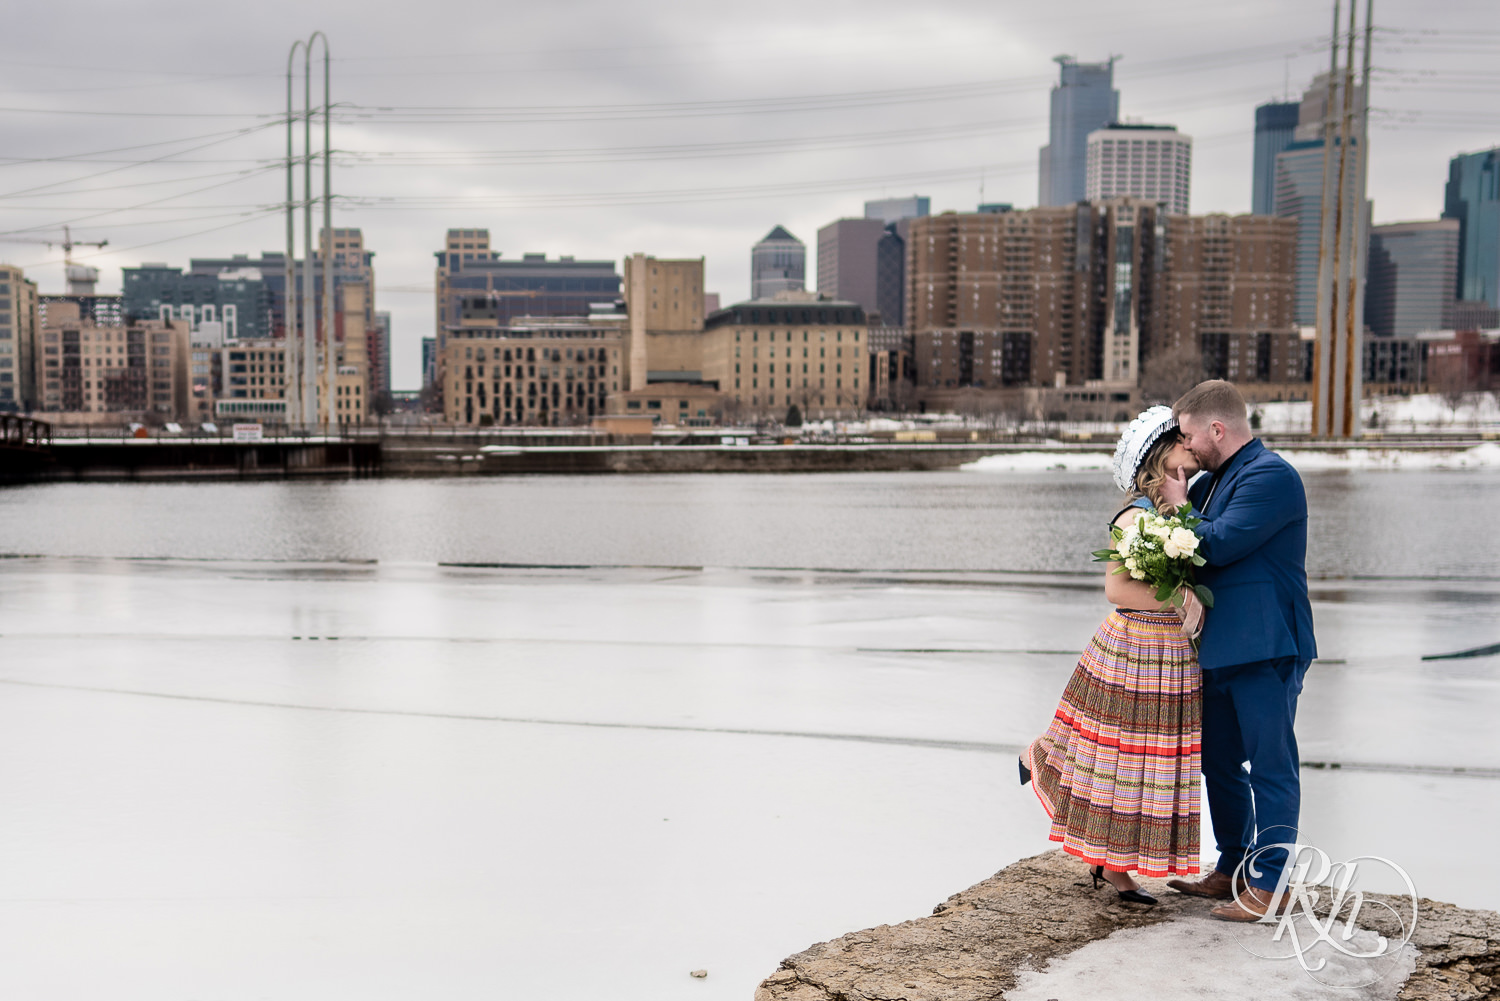 Man and Hmong woman kiss in Saint Anthony Main in Minneapolis, Minnesota with city in the background.